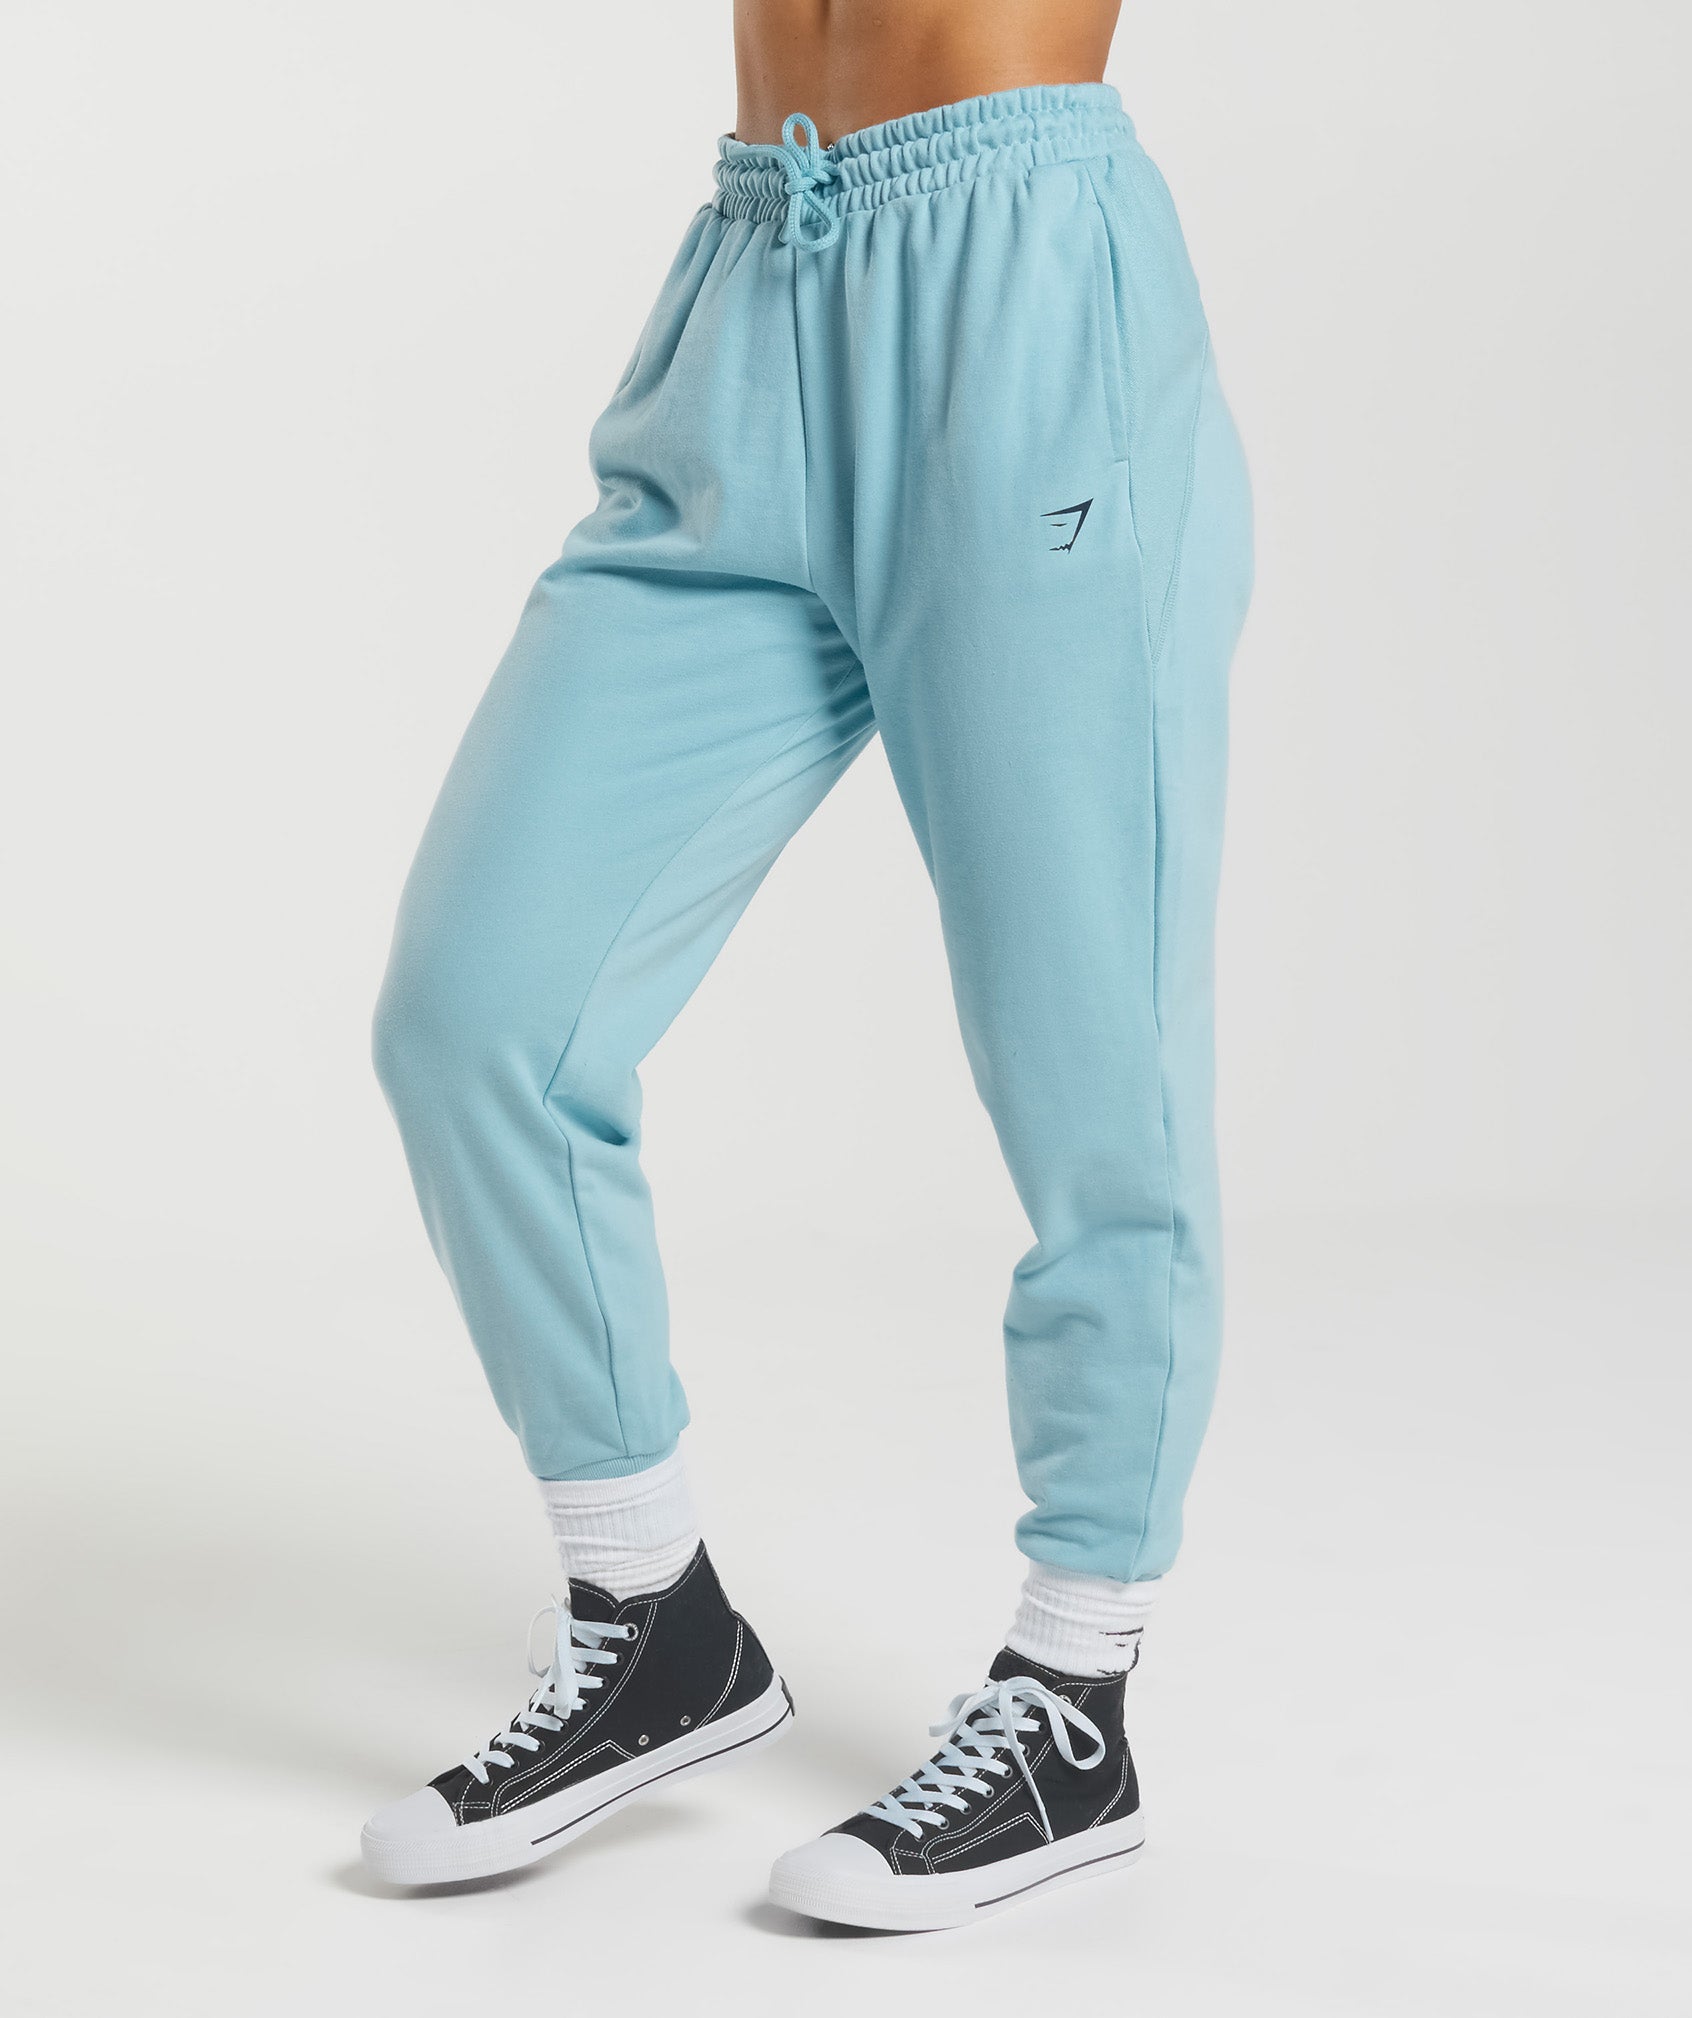 GS Power Joggers in Iceberg Blue